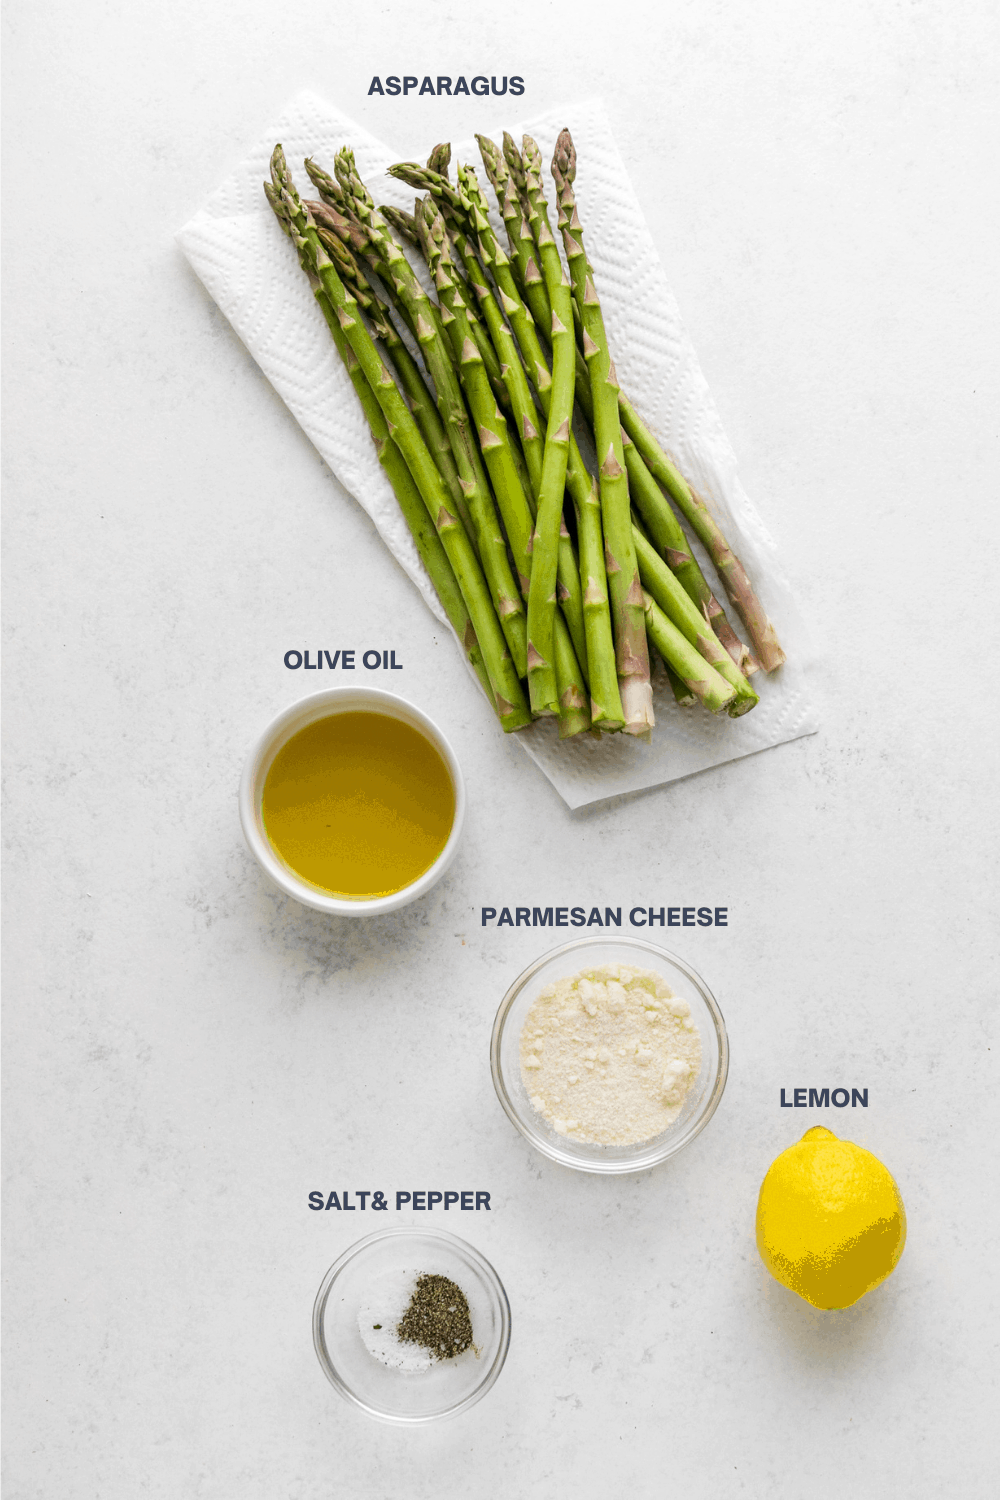 Raw asparagus, olive oil in a white bowl, shredded parmesan cheese, lemon, salt and pepper on a white surface with labels above them. 